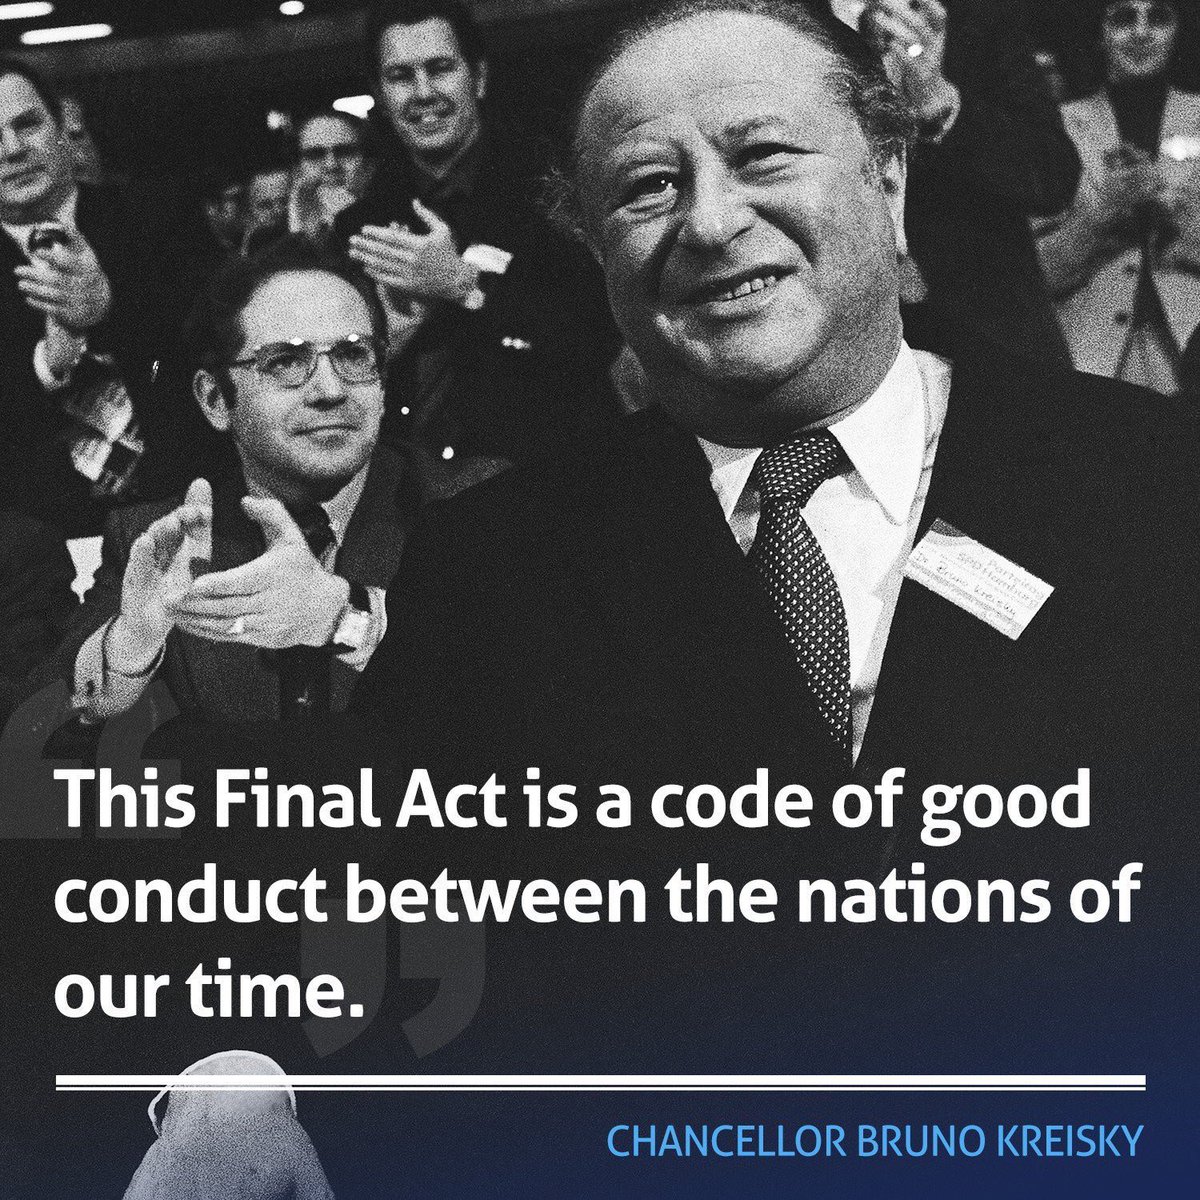 On 1 Aug 1975 the Helsinki Final Act was signed, which became the basis for OSCE. Let's see what you know about the Act & #OSCE. In honor of the date, we made a quiz on our @oscebishkek Instagram page. Visit it, scroll through stories, participate & win valuable gifts! Let's go! https://t.co/0mCUrdg28R